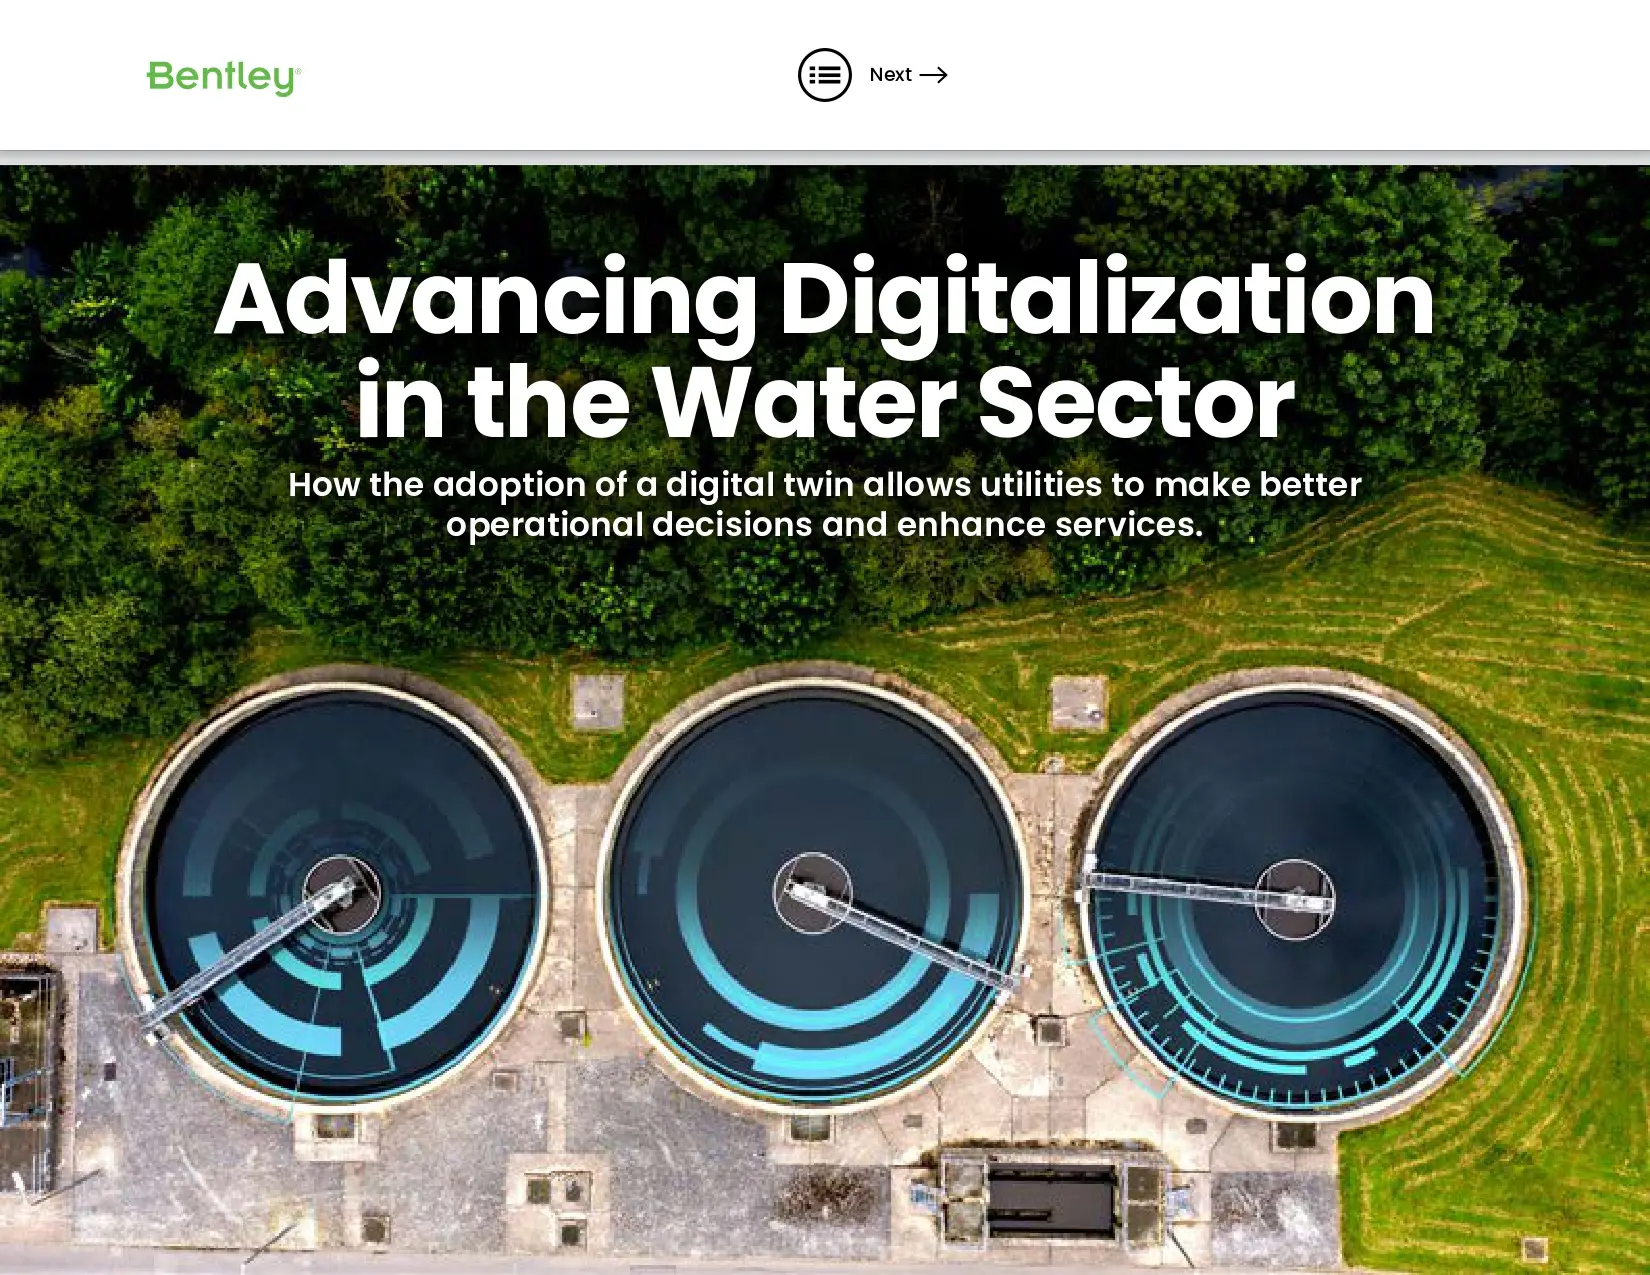 Advancing Digitalization in the Water Sector